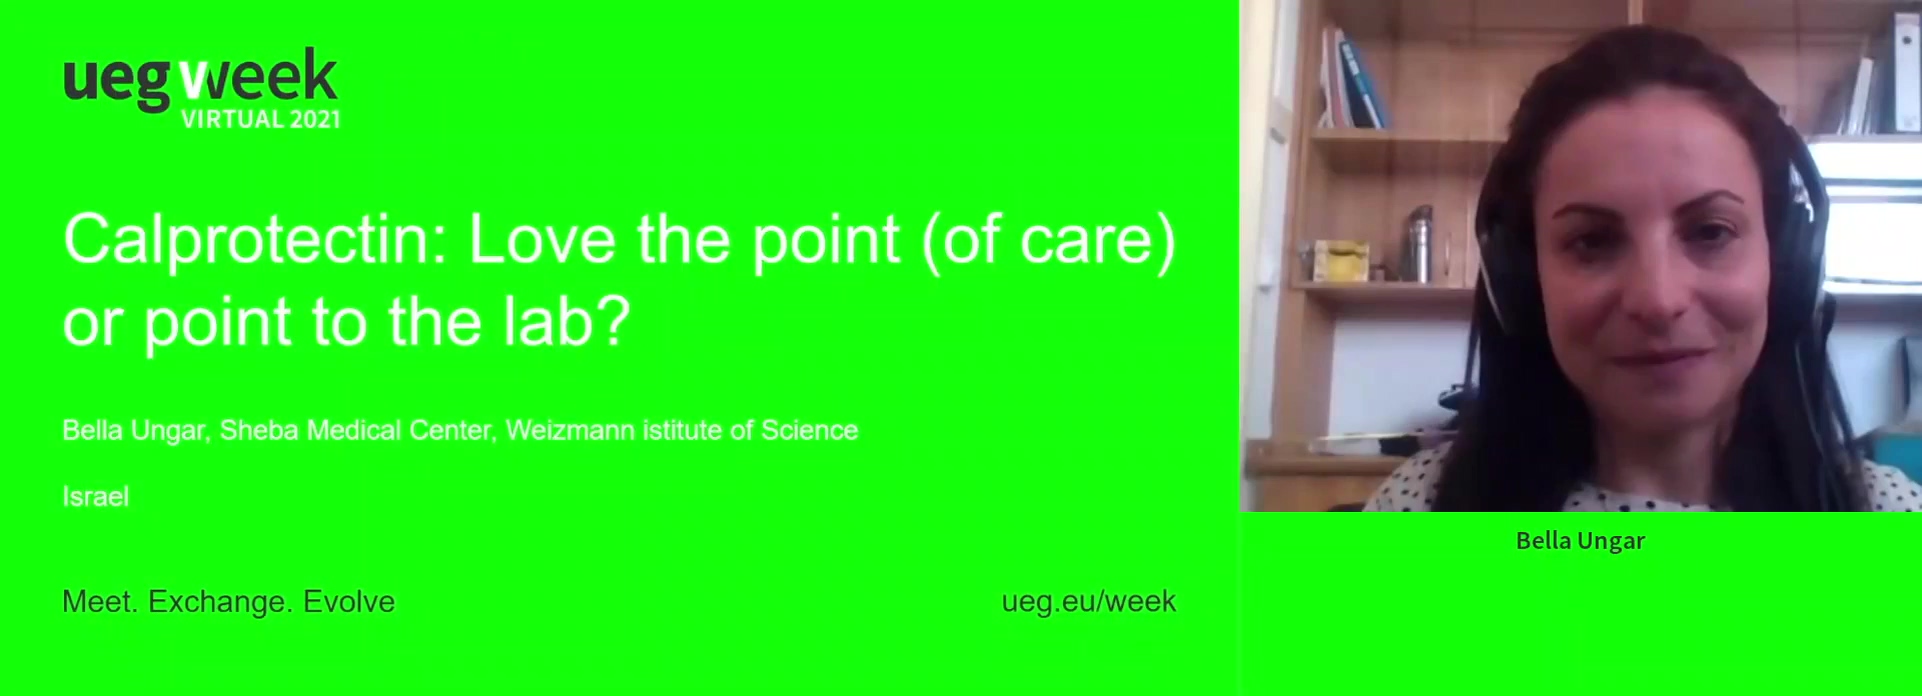 Calprotectin: Love the point (of care) or point to the lab?